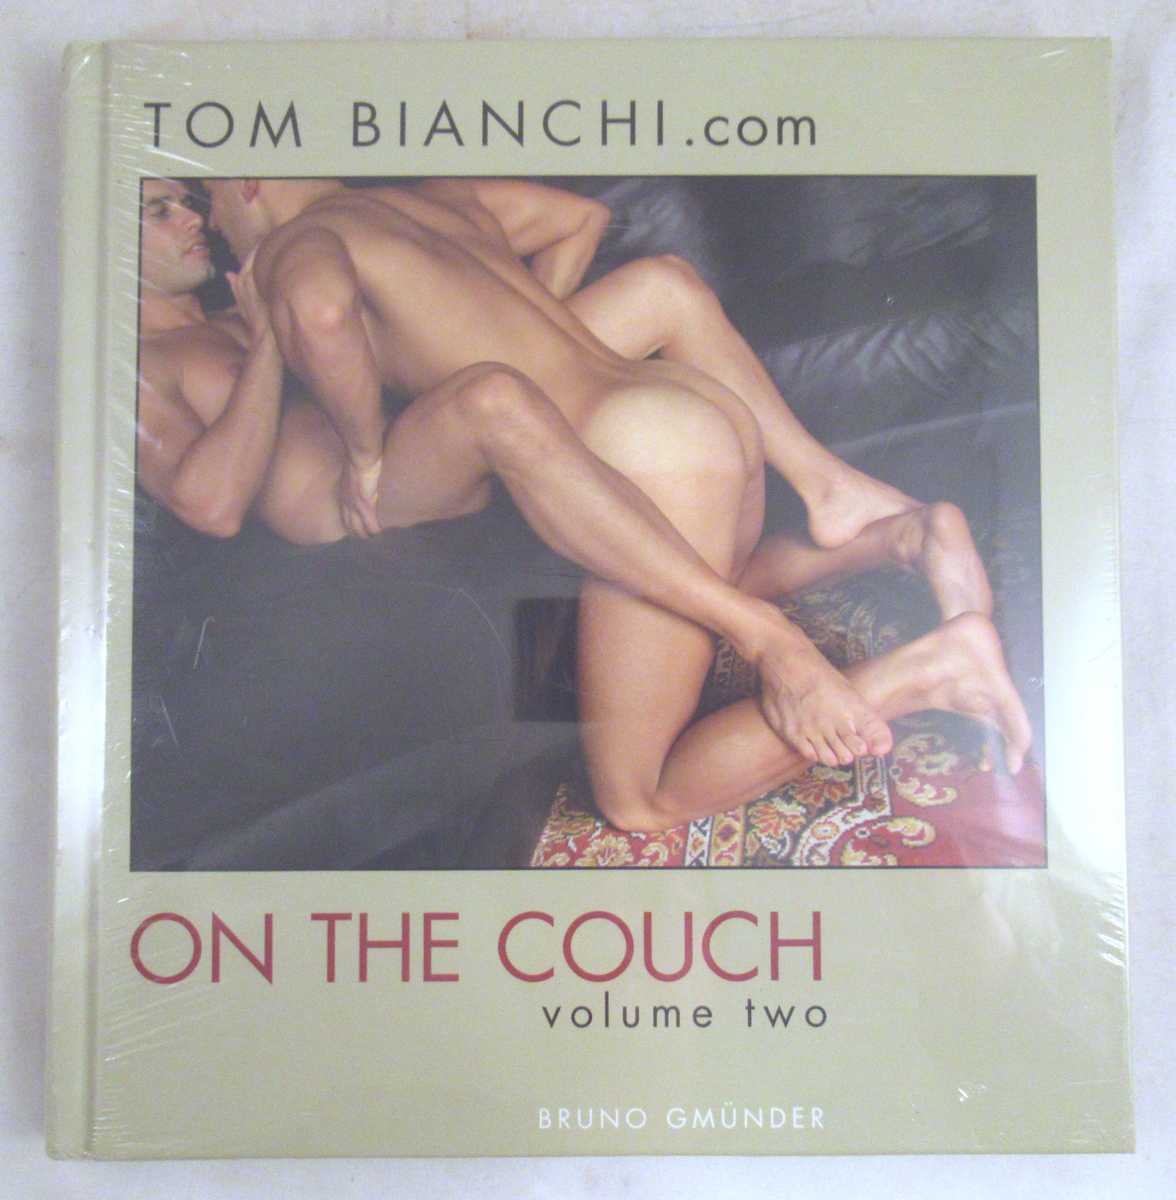 Bianchi, Tom - On the Couch, Volume Two